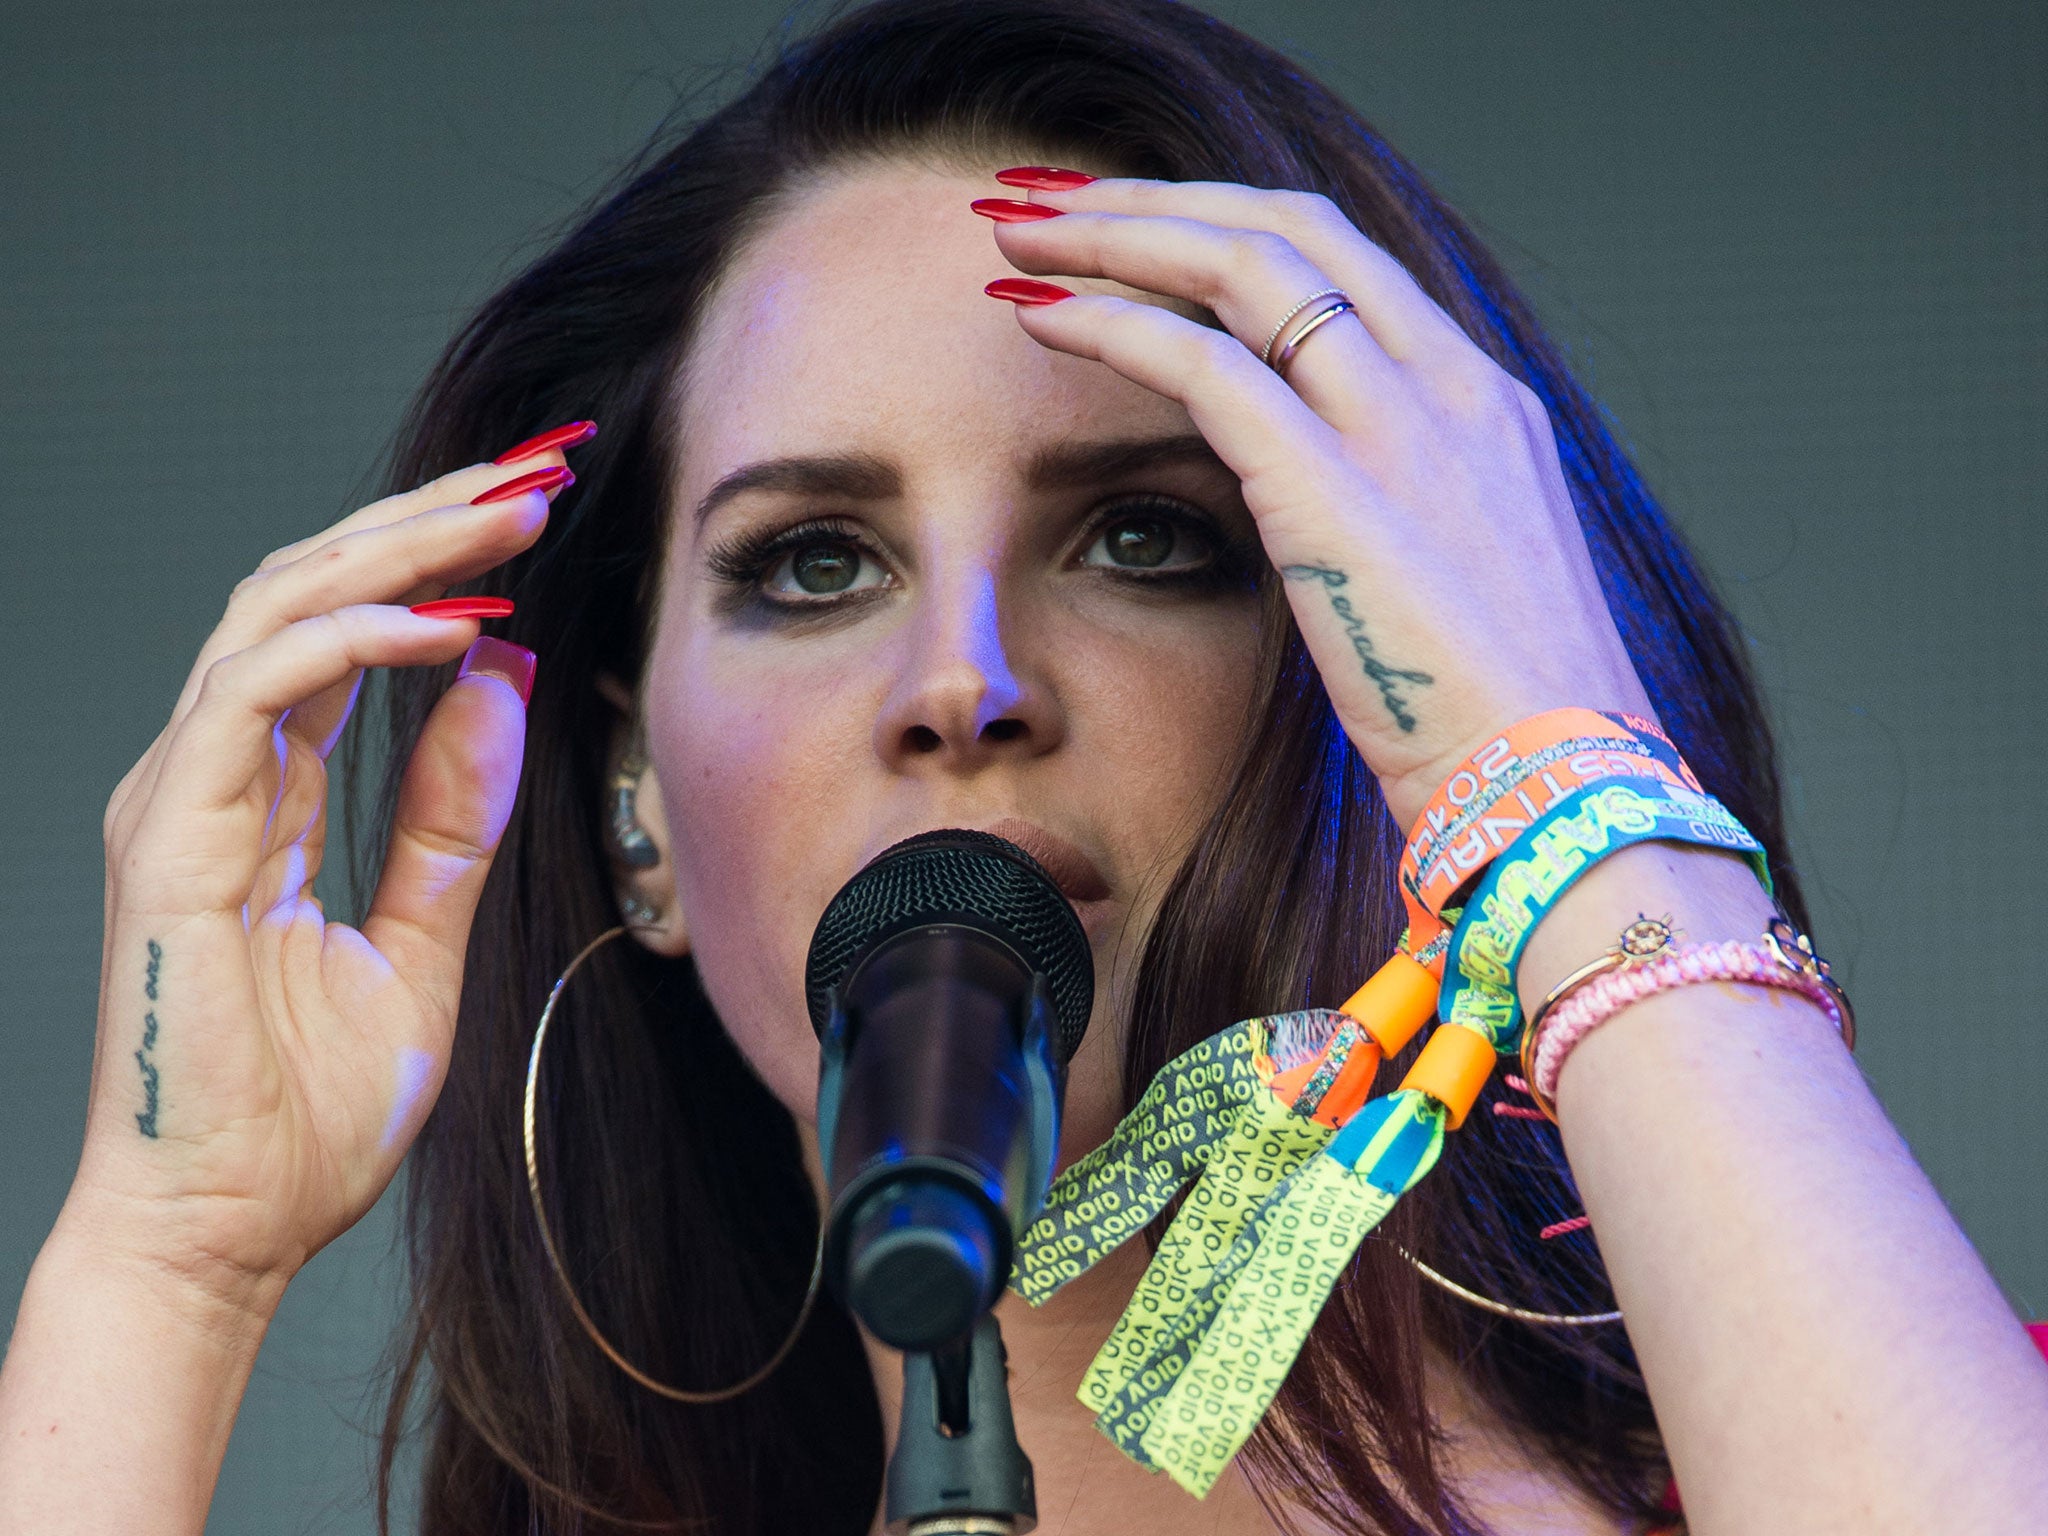 Lane Del Rey performing on the Pyramid Stage at Glastonbury 2014